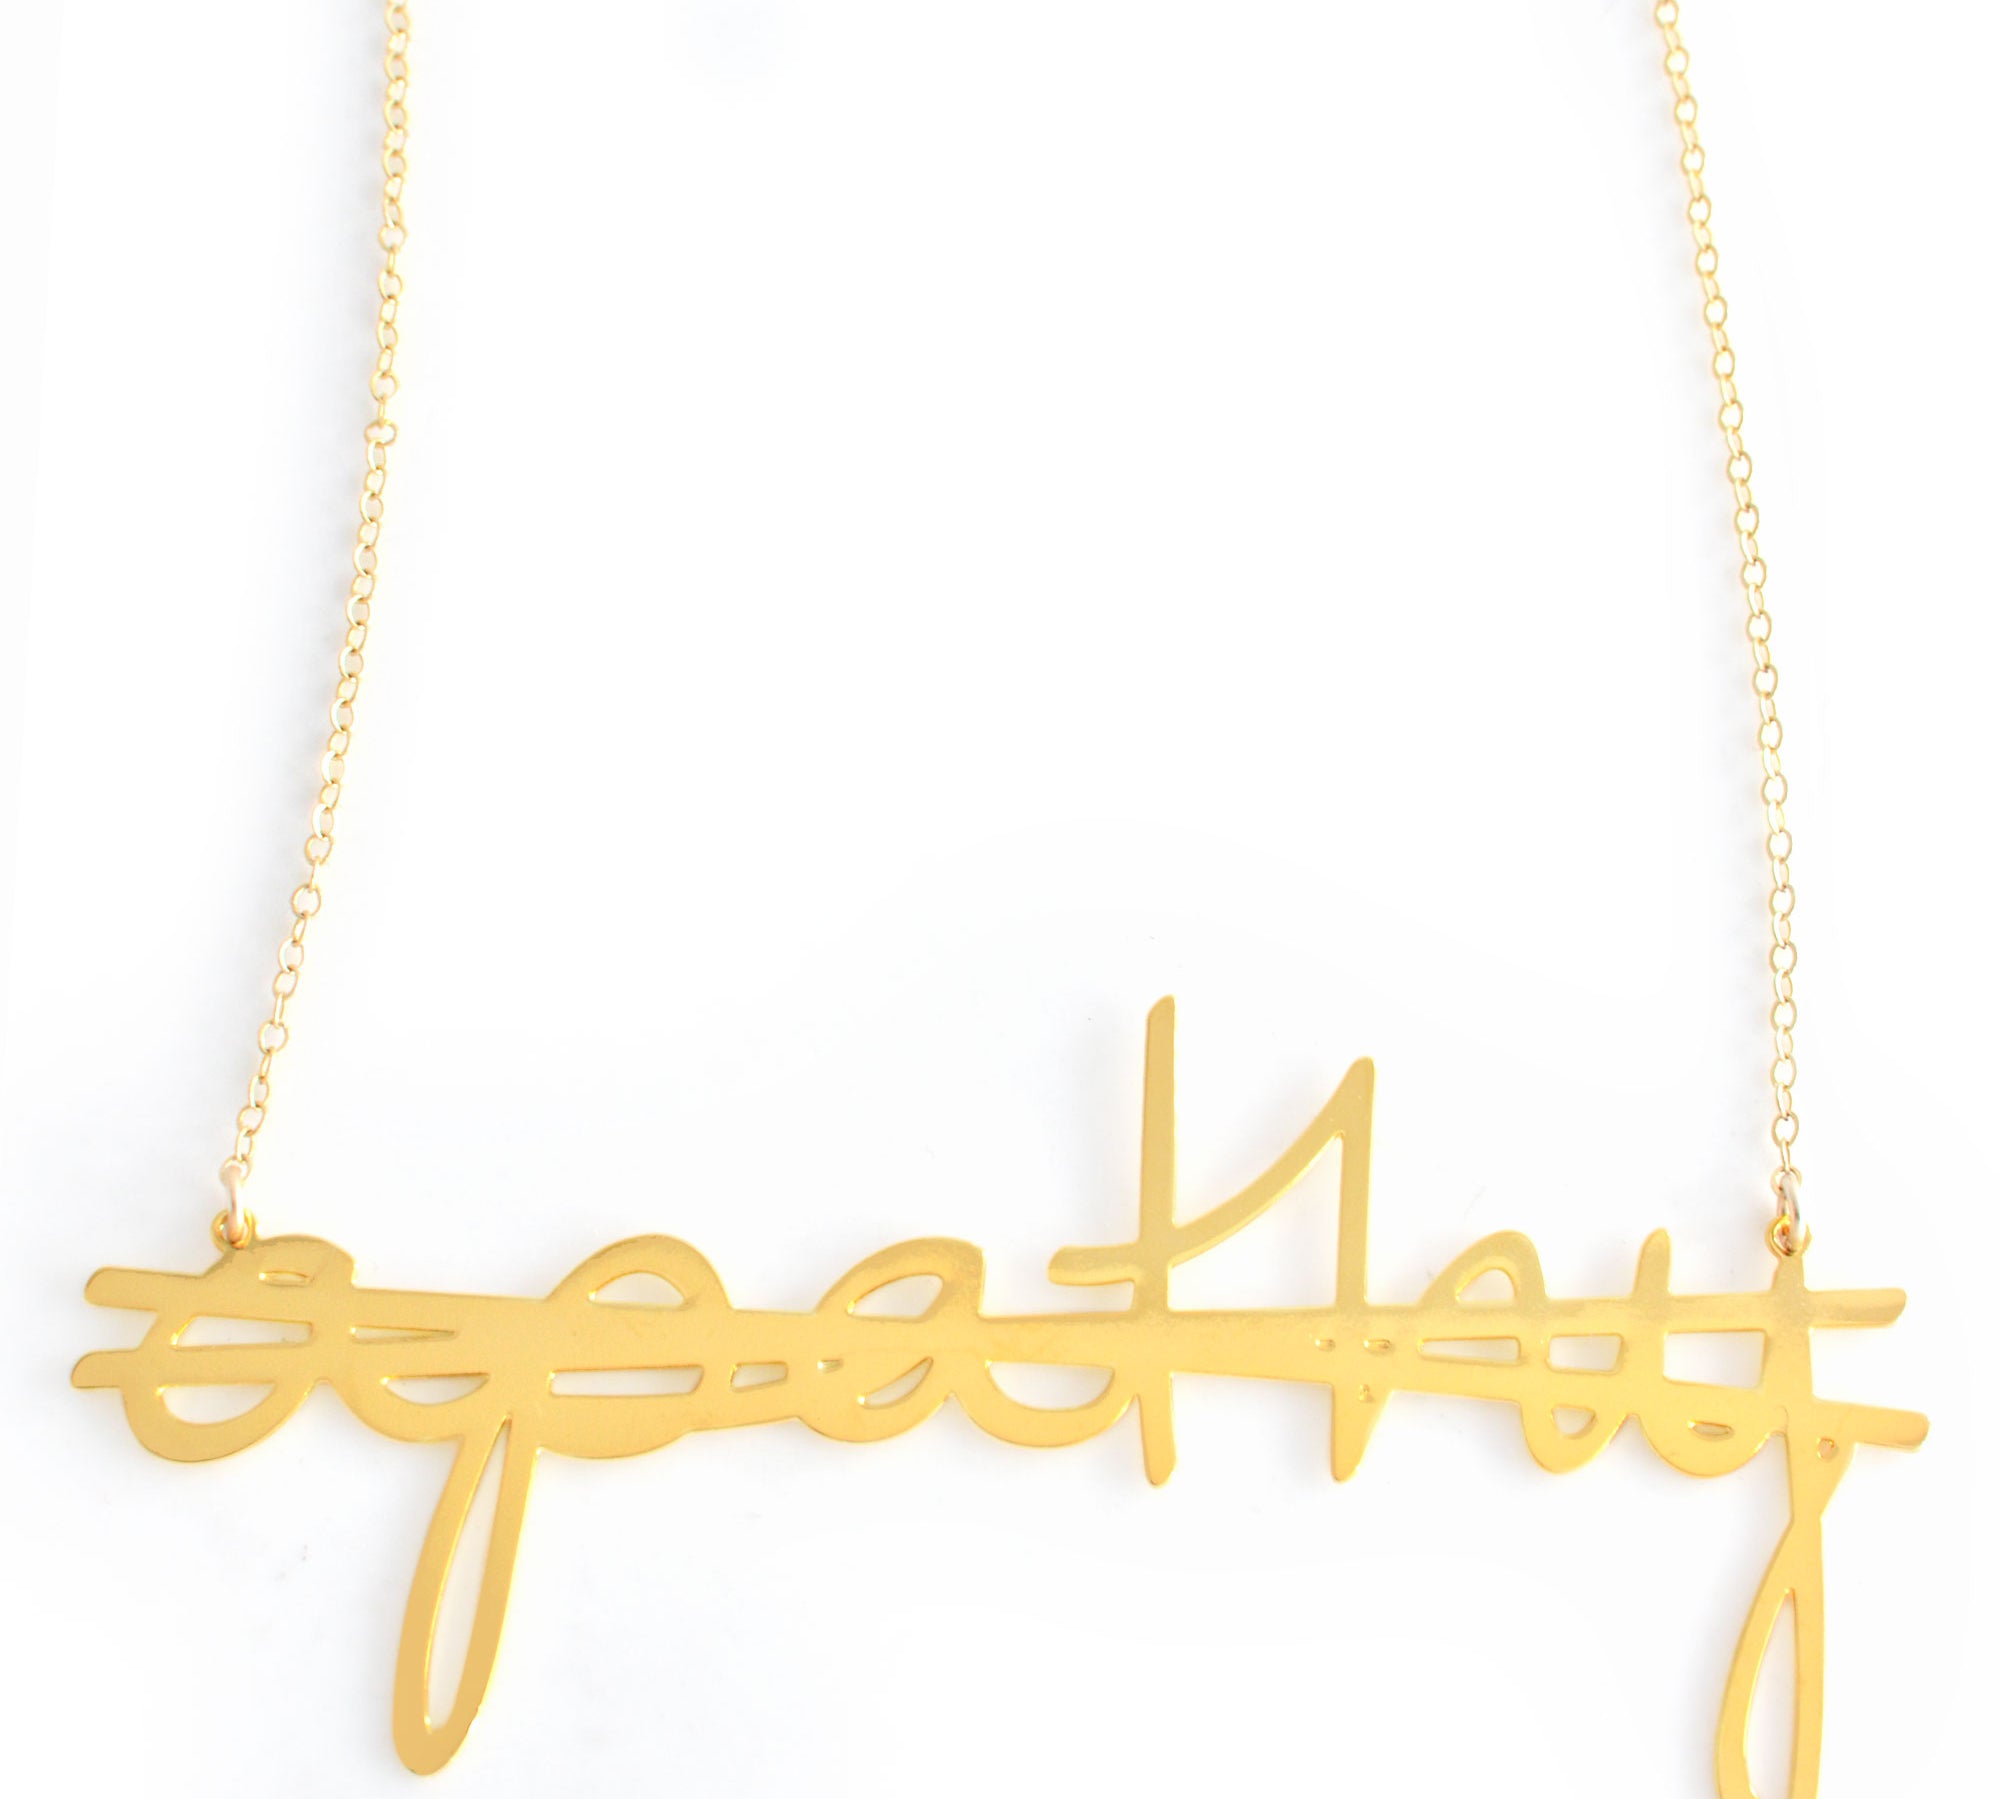 No More Apathy Necklace - High Quality, Affordable, Hand Written, Empowering, Self Love, Mantra Word Necklace - Available in Gold and Silver - Small and Large Sizes - Made in USA - Brevity Jewelry